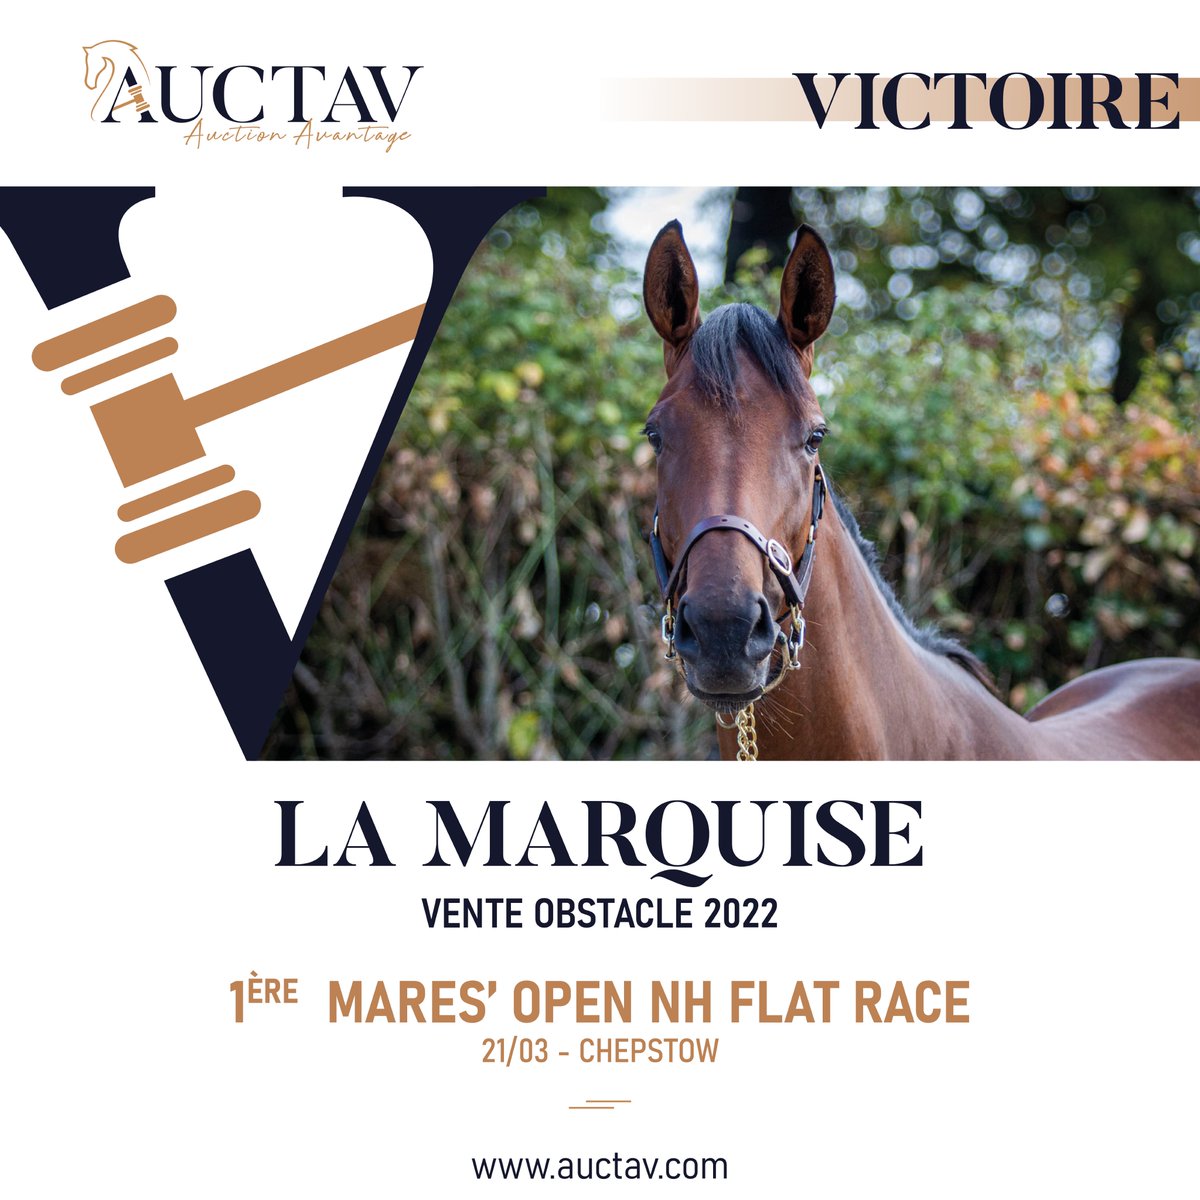 🥇Promising LA MARQUISE won her 2nd bumper out of 3 starts in good style for @jamiesnowden & Buckett, Lovell, Snowden & Stacey.
Half-sister to G3W winner MISTER POLICEMAN, she was bred by @EcurieLBaudron & secured by @JonesToby86 at the 2022 NH Sale on behalf of Lucy Snowden